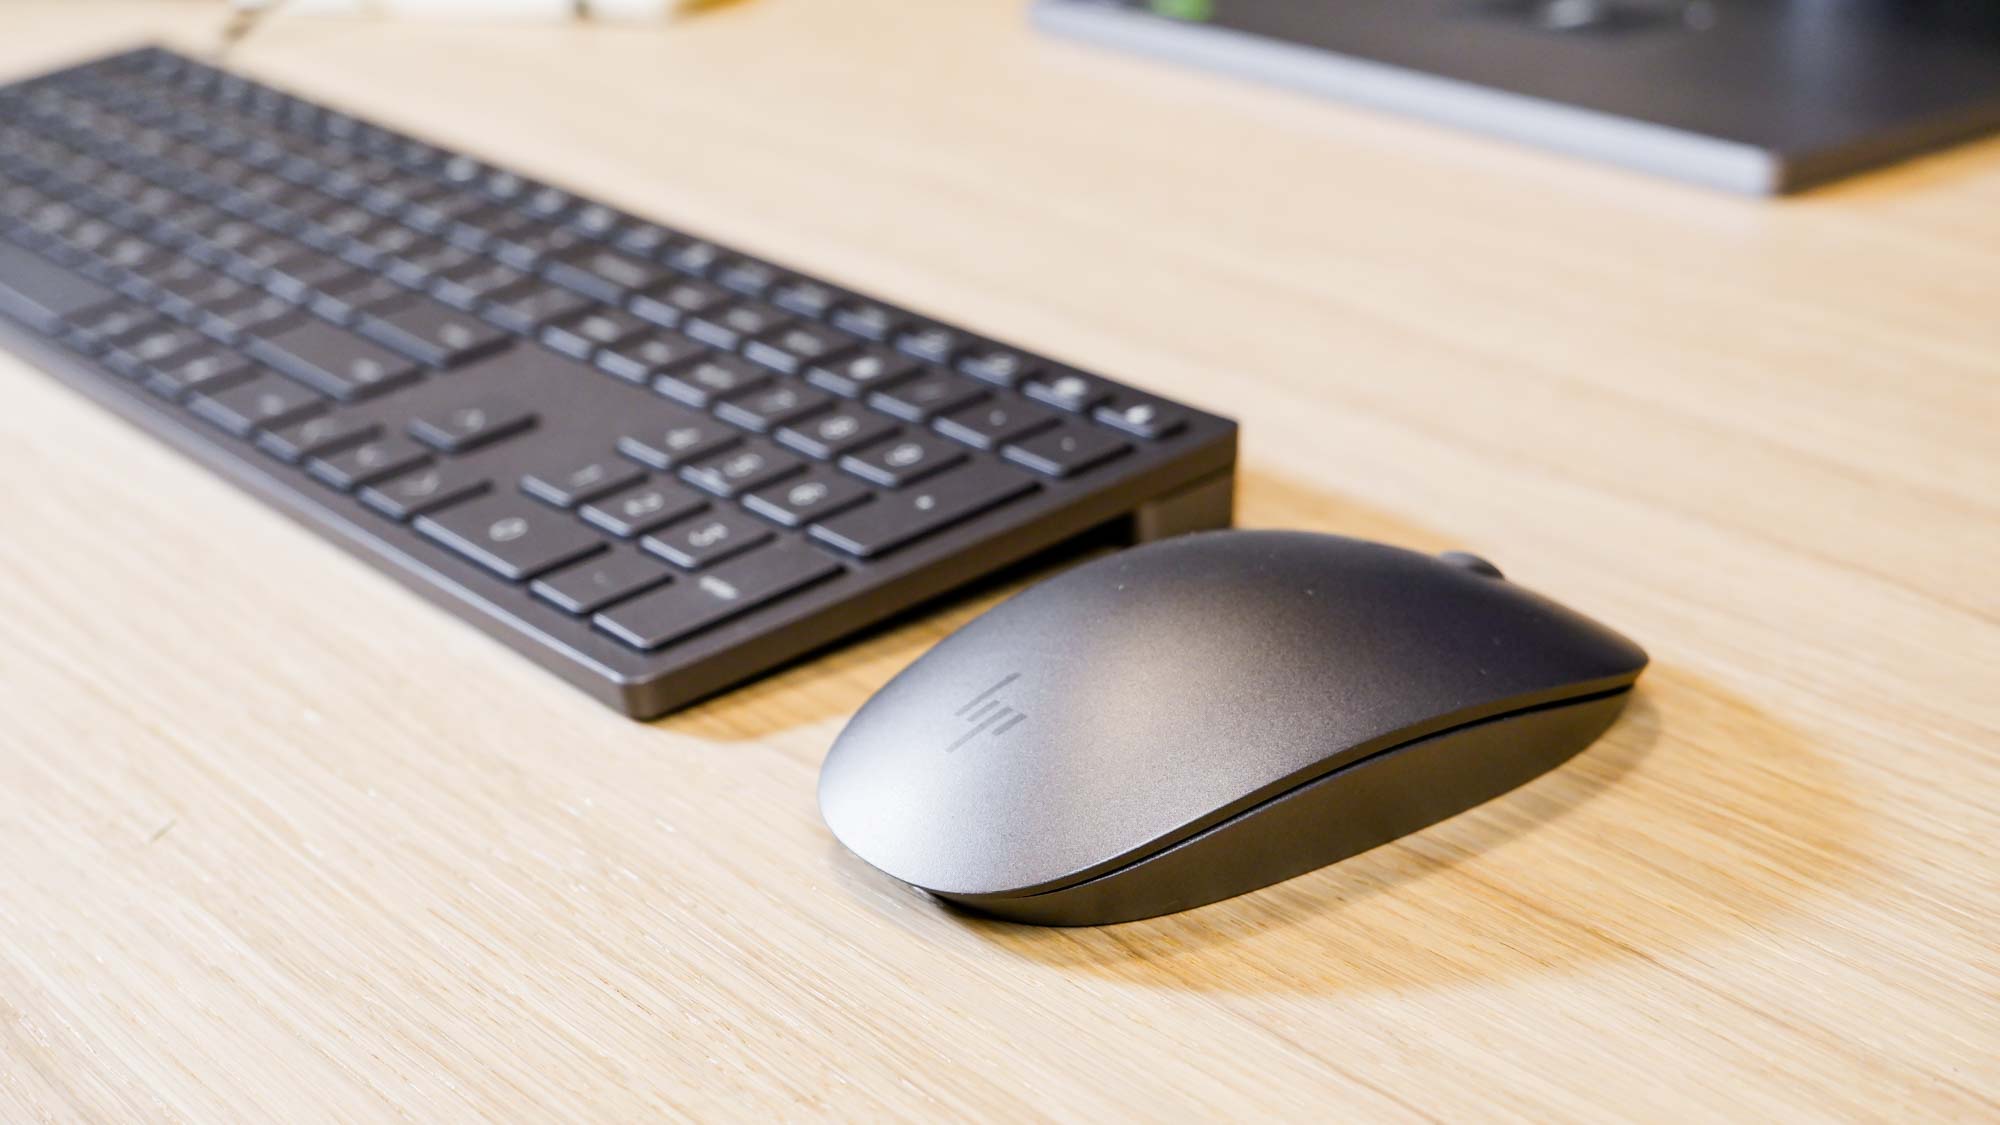 The HP Envy 34 comes bundled with a mouse and keyboard.